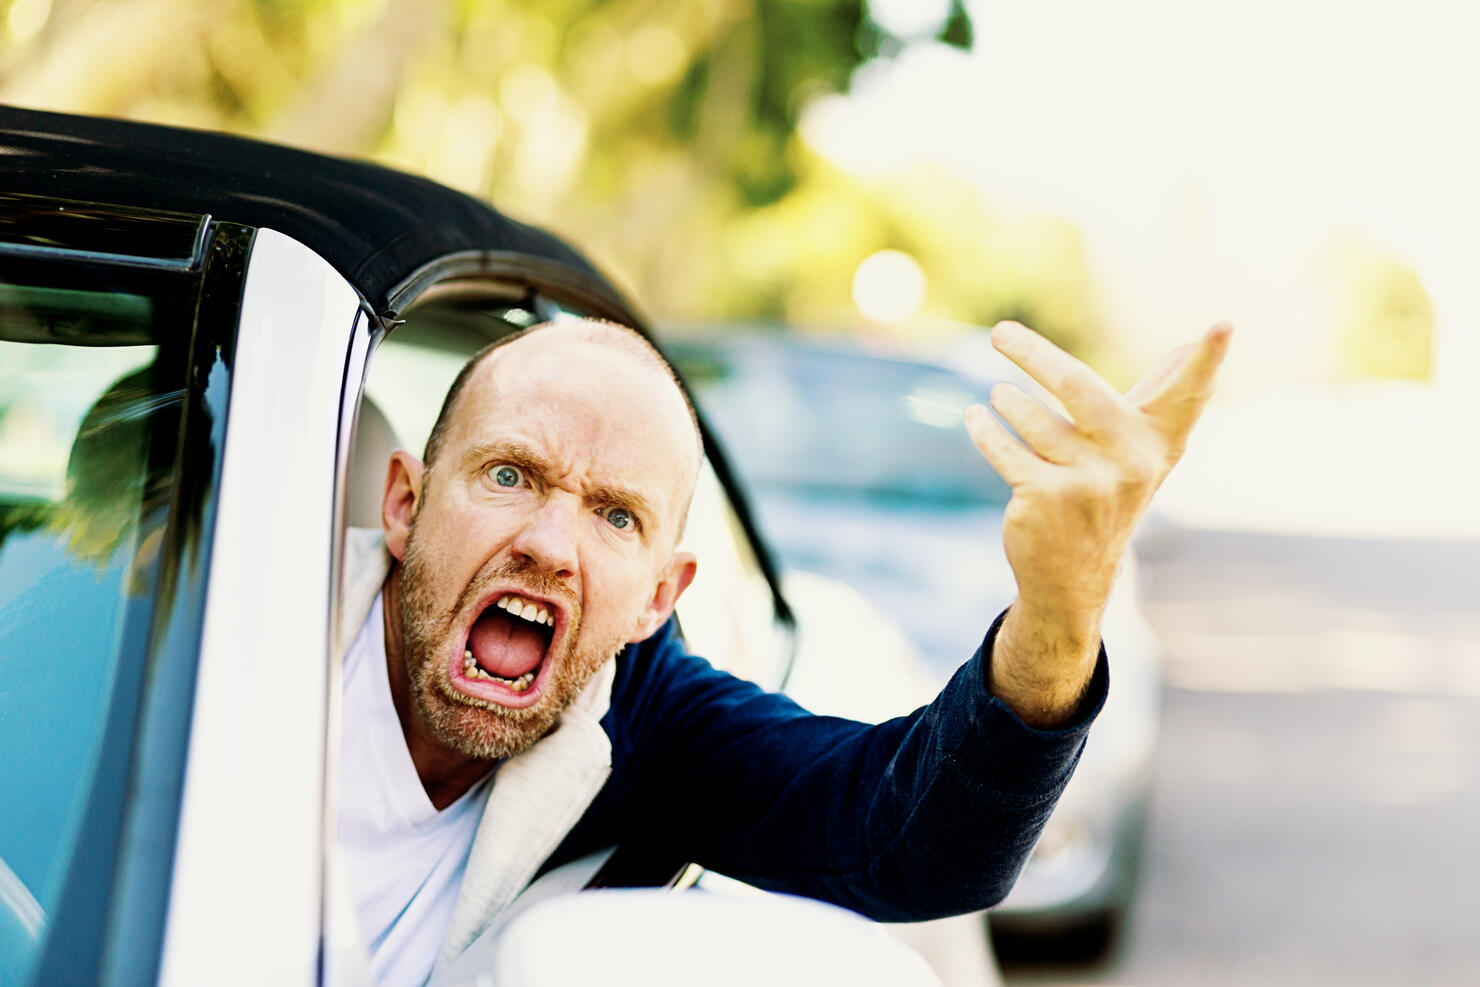 Enraged male driver shouts and gestures threateningly